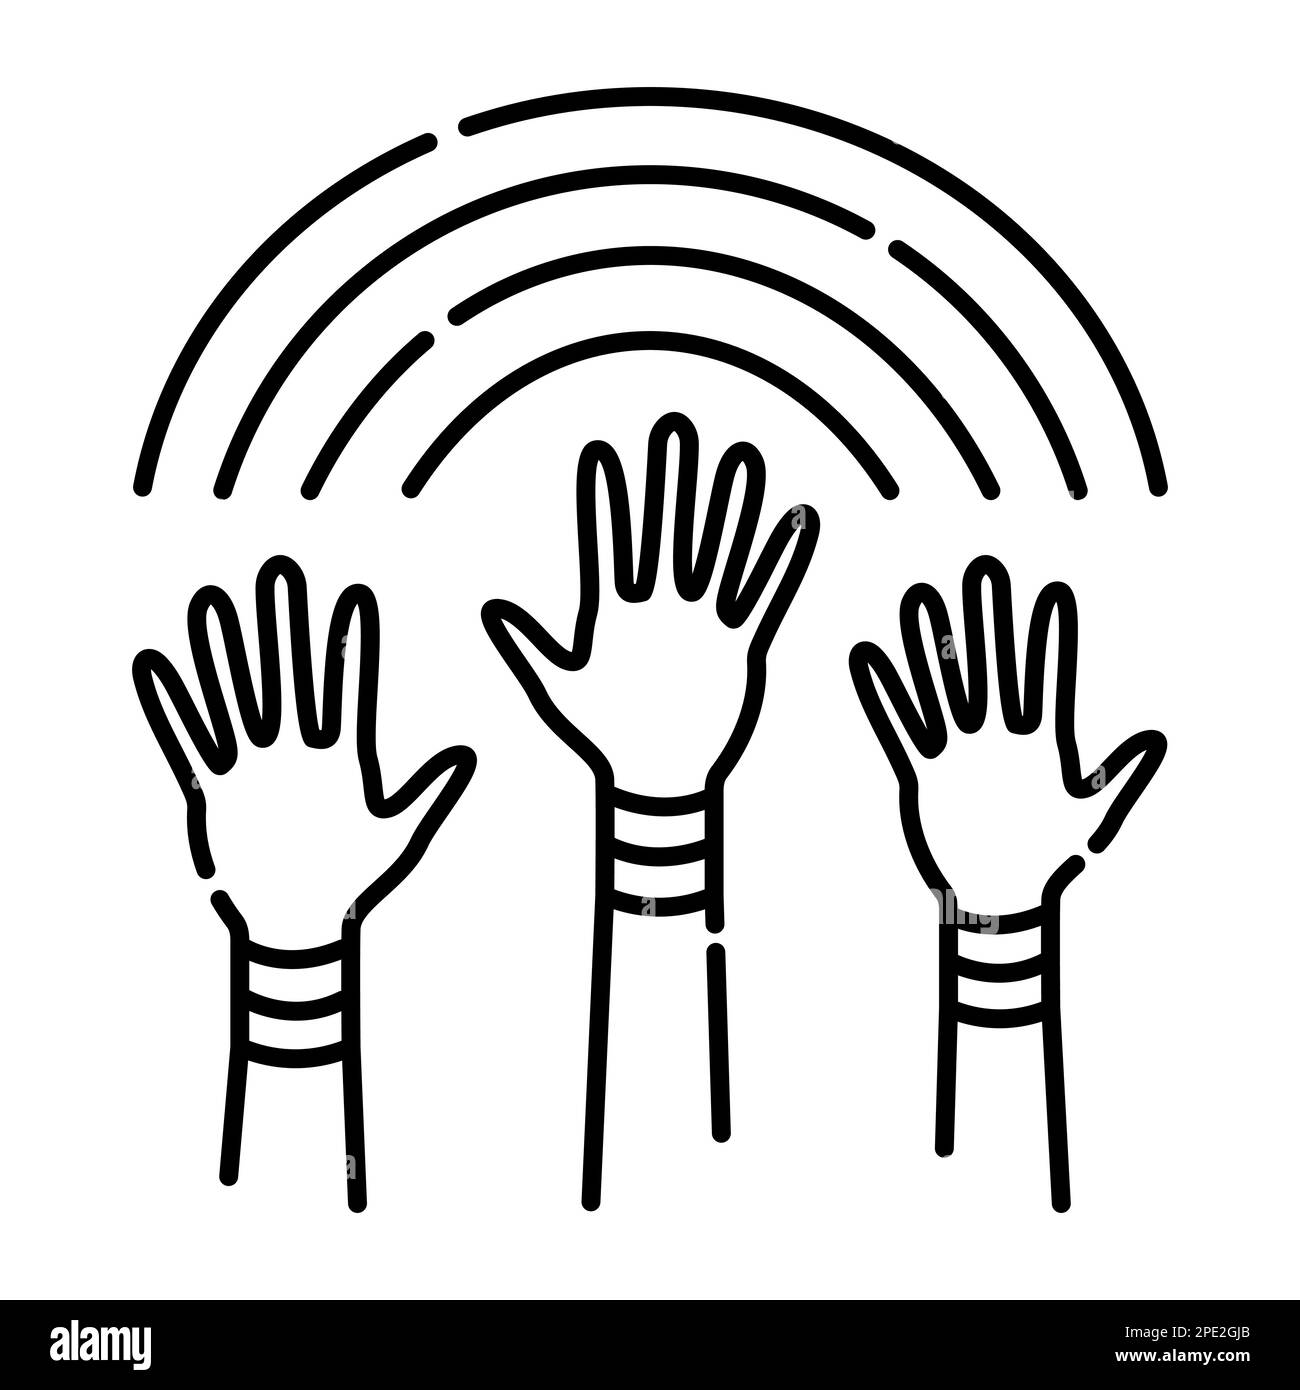 The symbol of lgbt love, hands up to rainbow, vector black line illustration Stock Vector